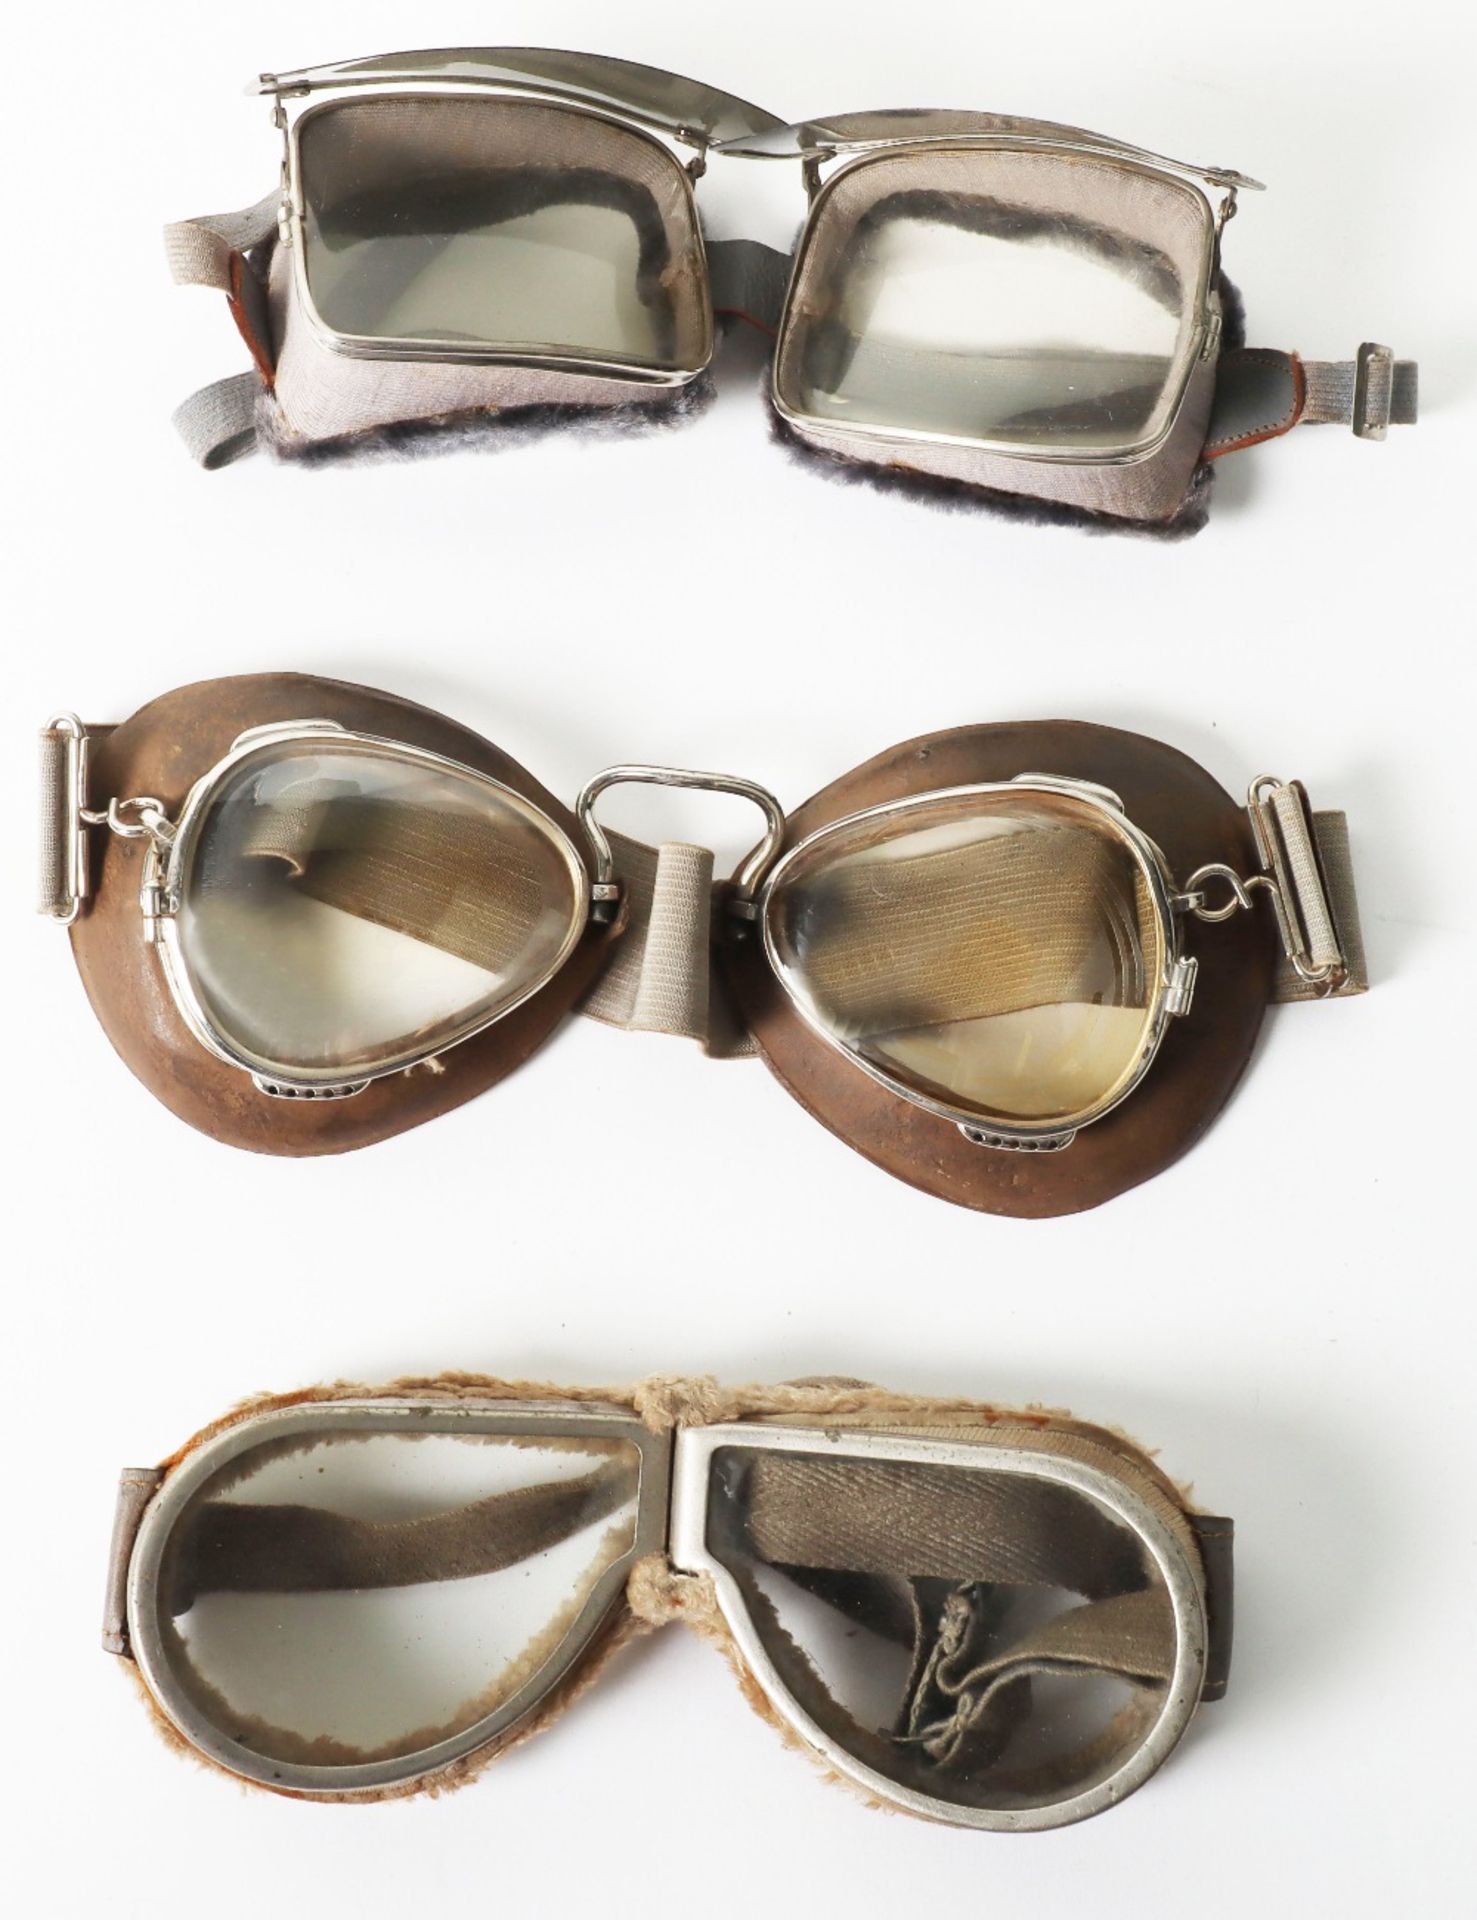 Three Pairs of Aviators Flying Goggles - Image 2 of 6